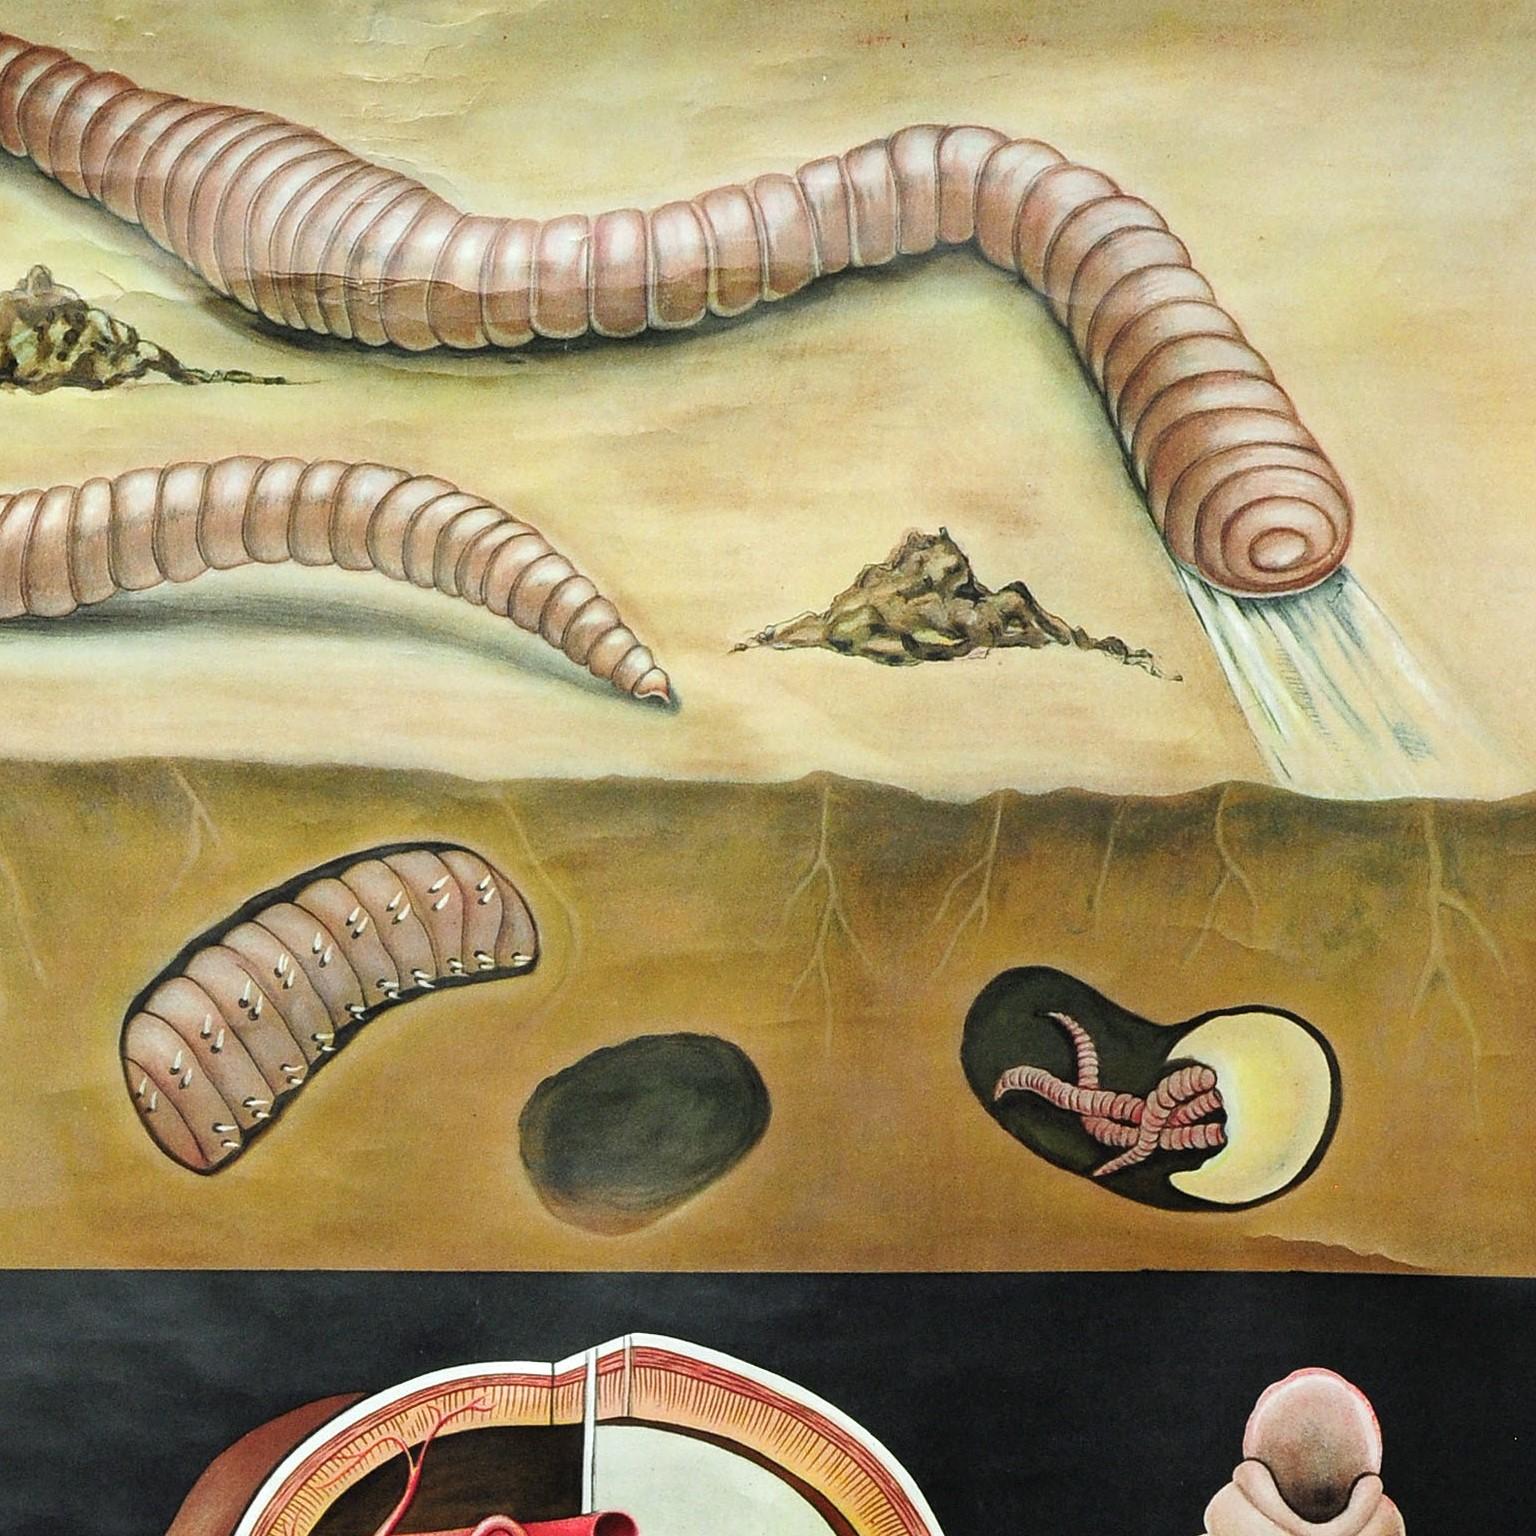 Country Natural Life Art Print by Jung Koch Quentell Earthworm Lumbricidae Wall Chart For Sale